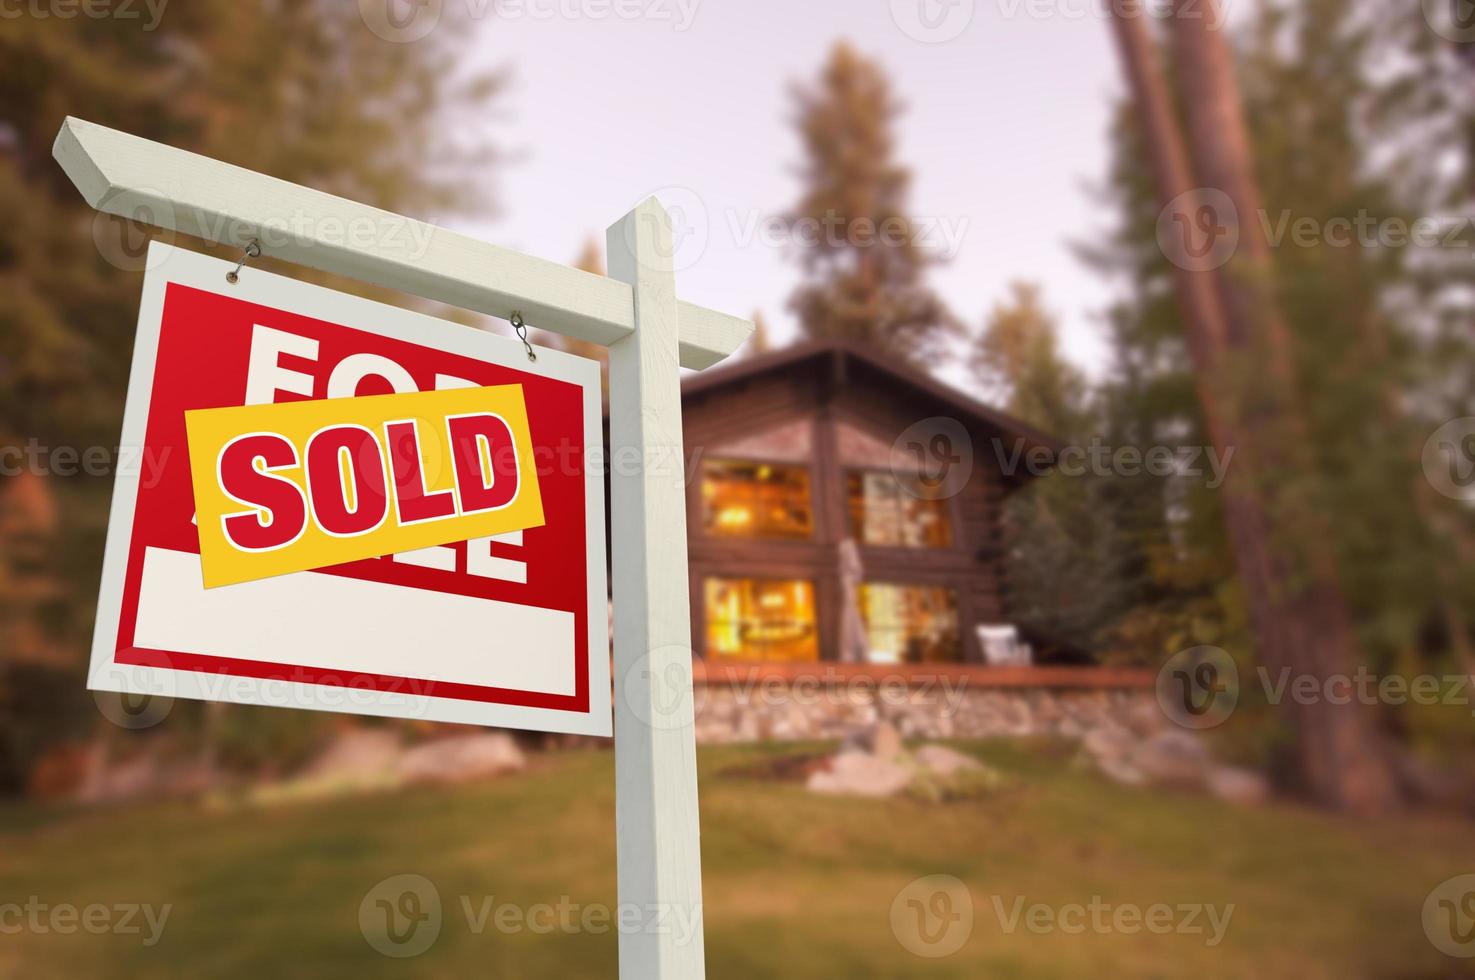 Sold Home For Sale Sign and Beautiful Log Cabin photo